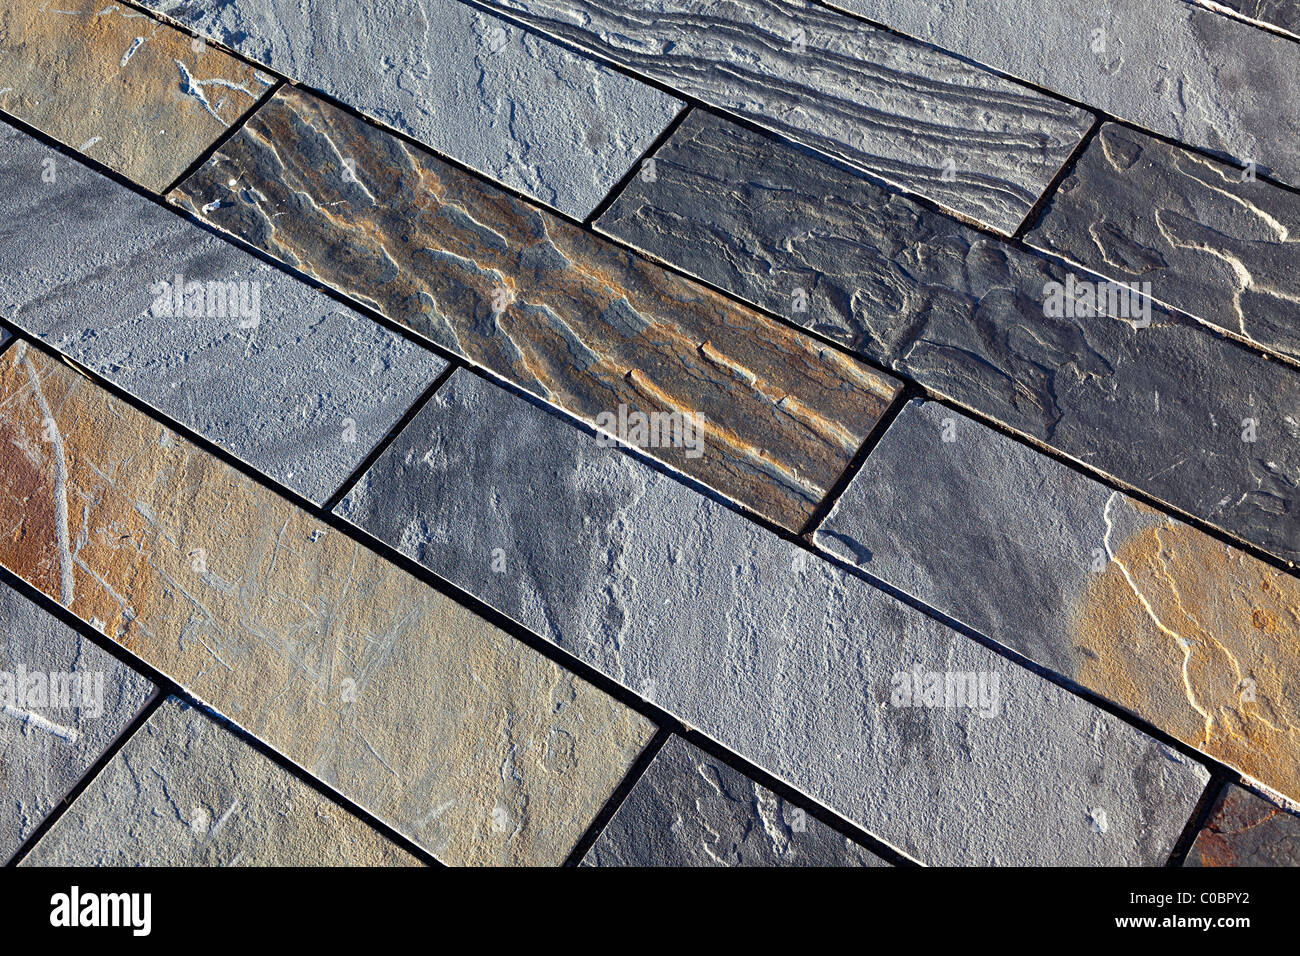 Paving stone with ripple marks and natural features Ebbw Vale Wales UK Stock Photo